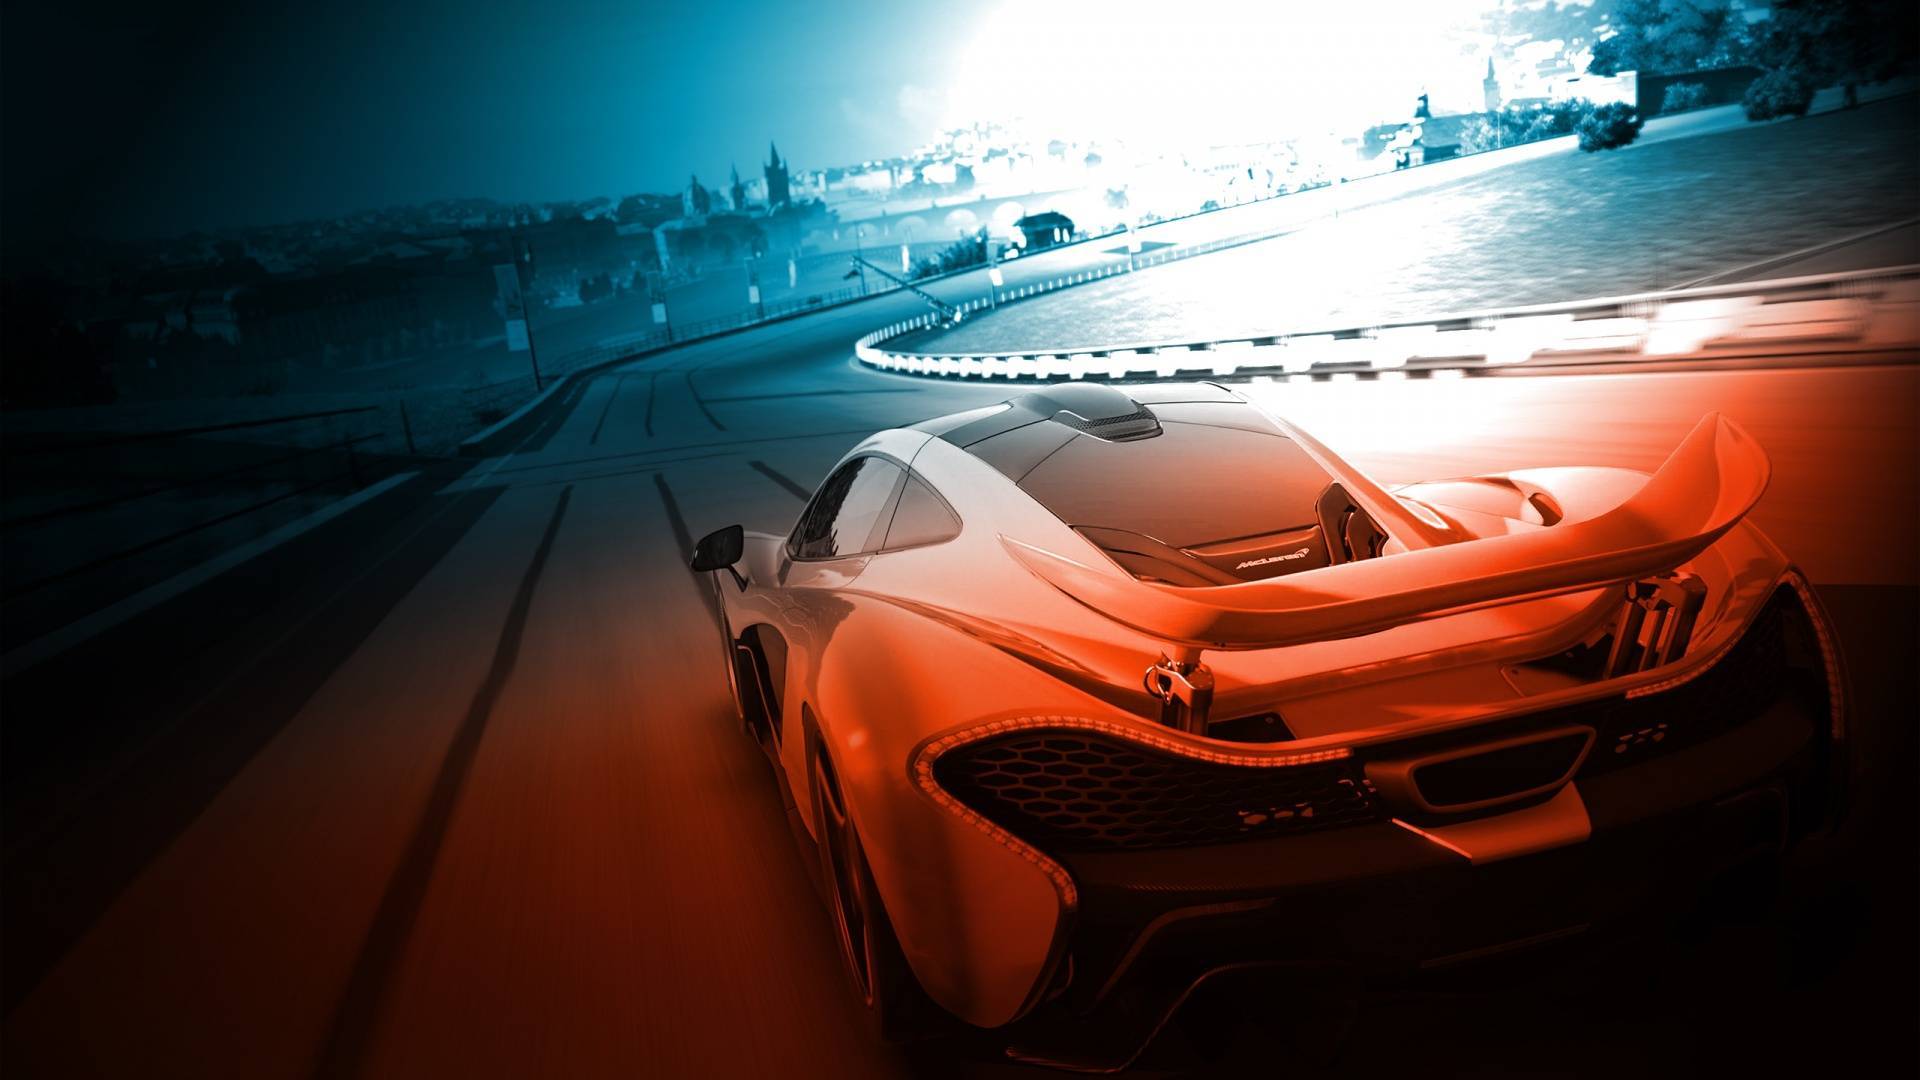 Forza 5 Cool Car Wallpapers For Desktop Free Download Of Forza 5